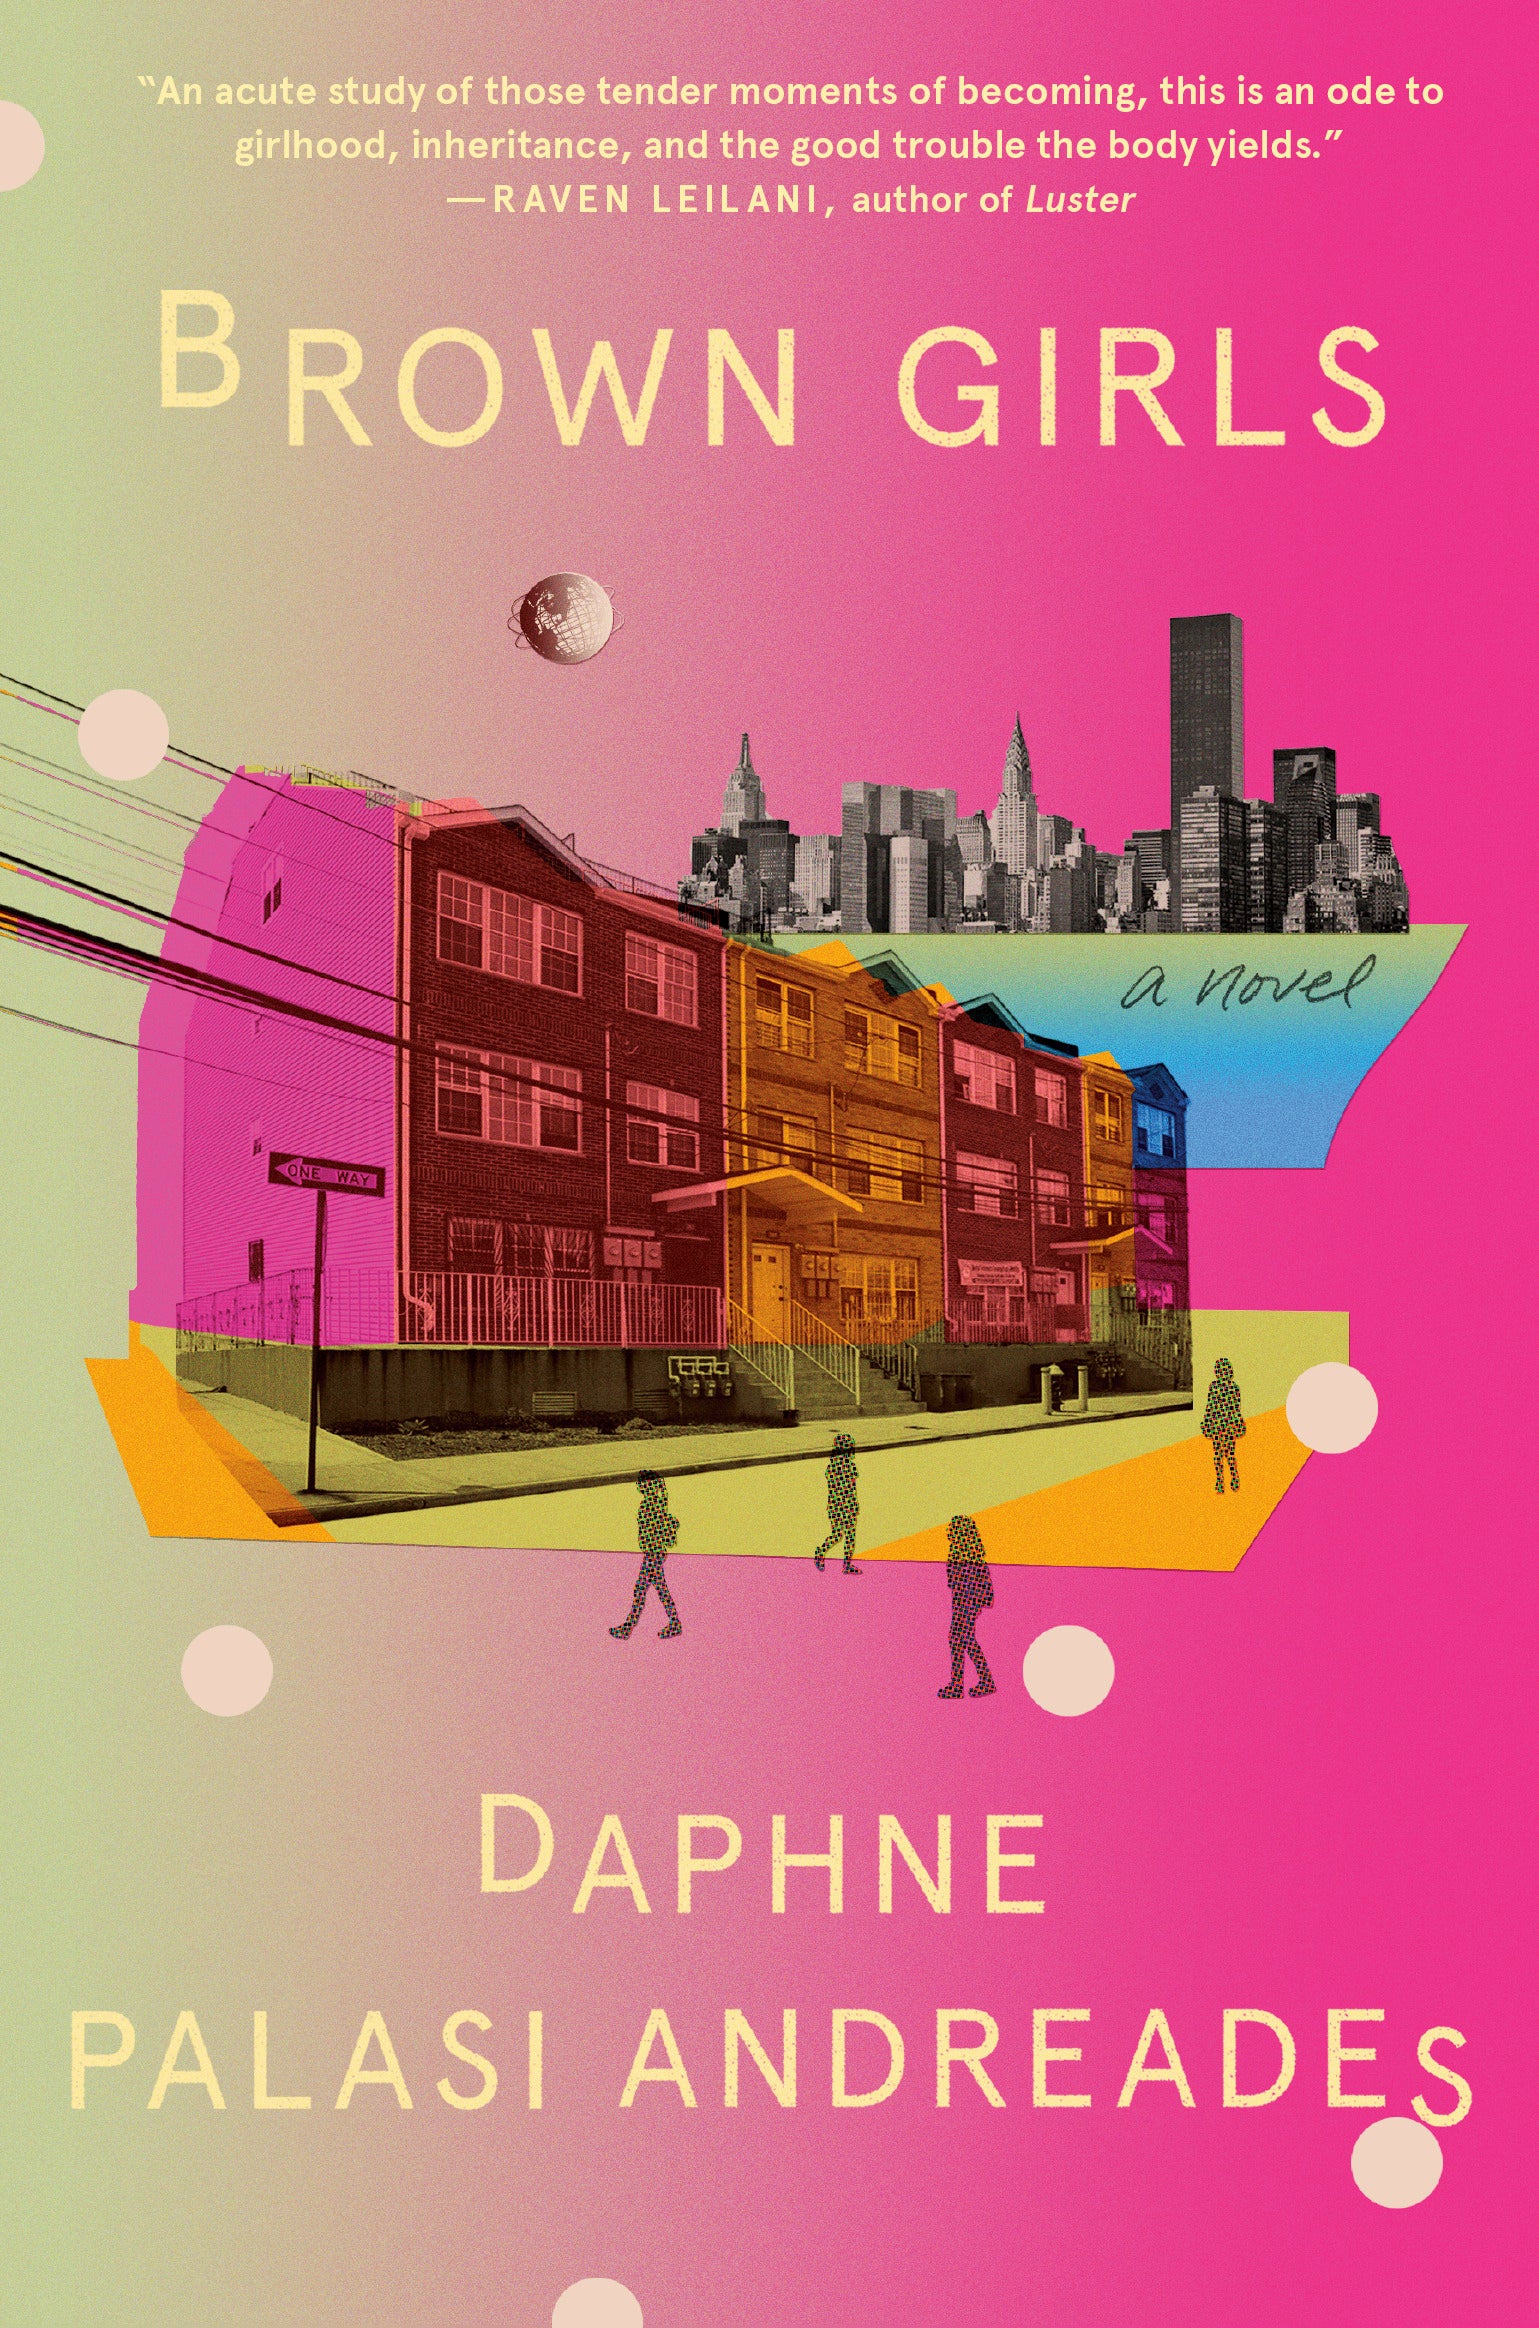 Book Review - Brown Girls